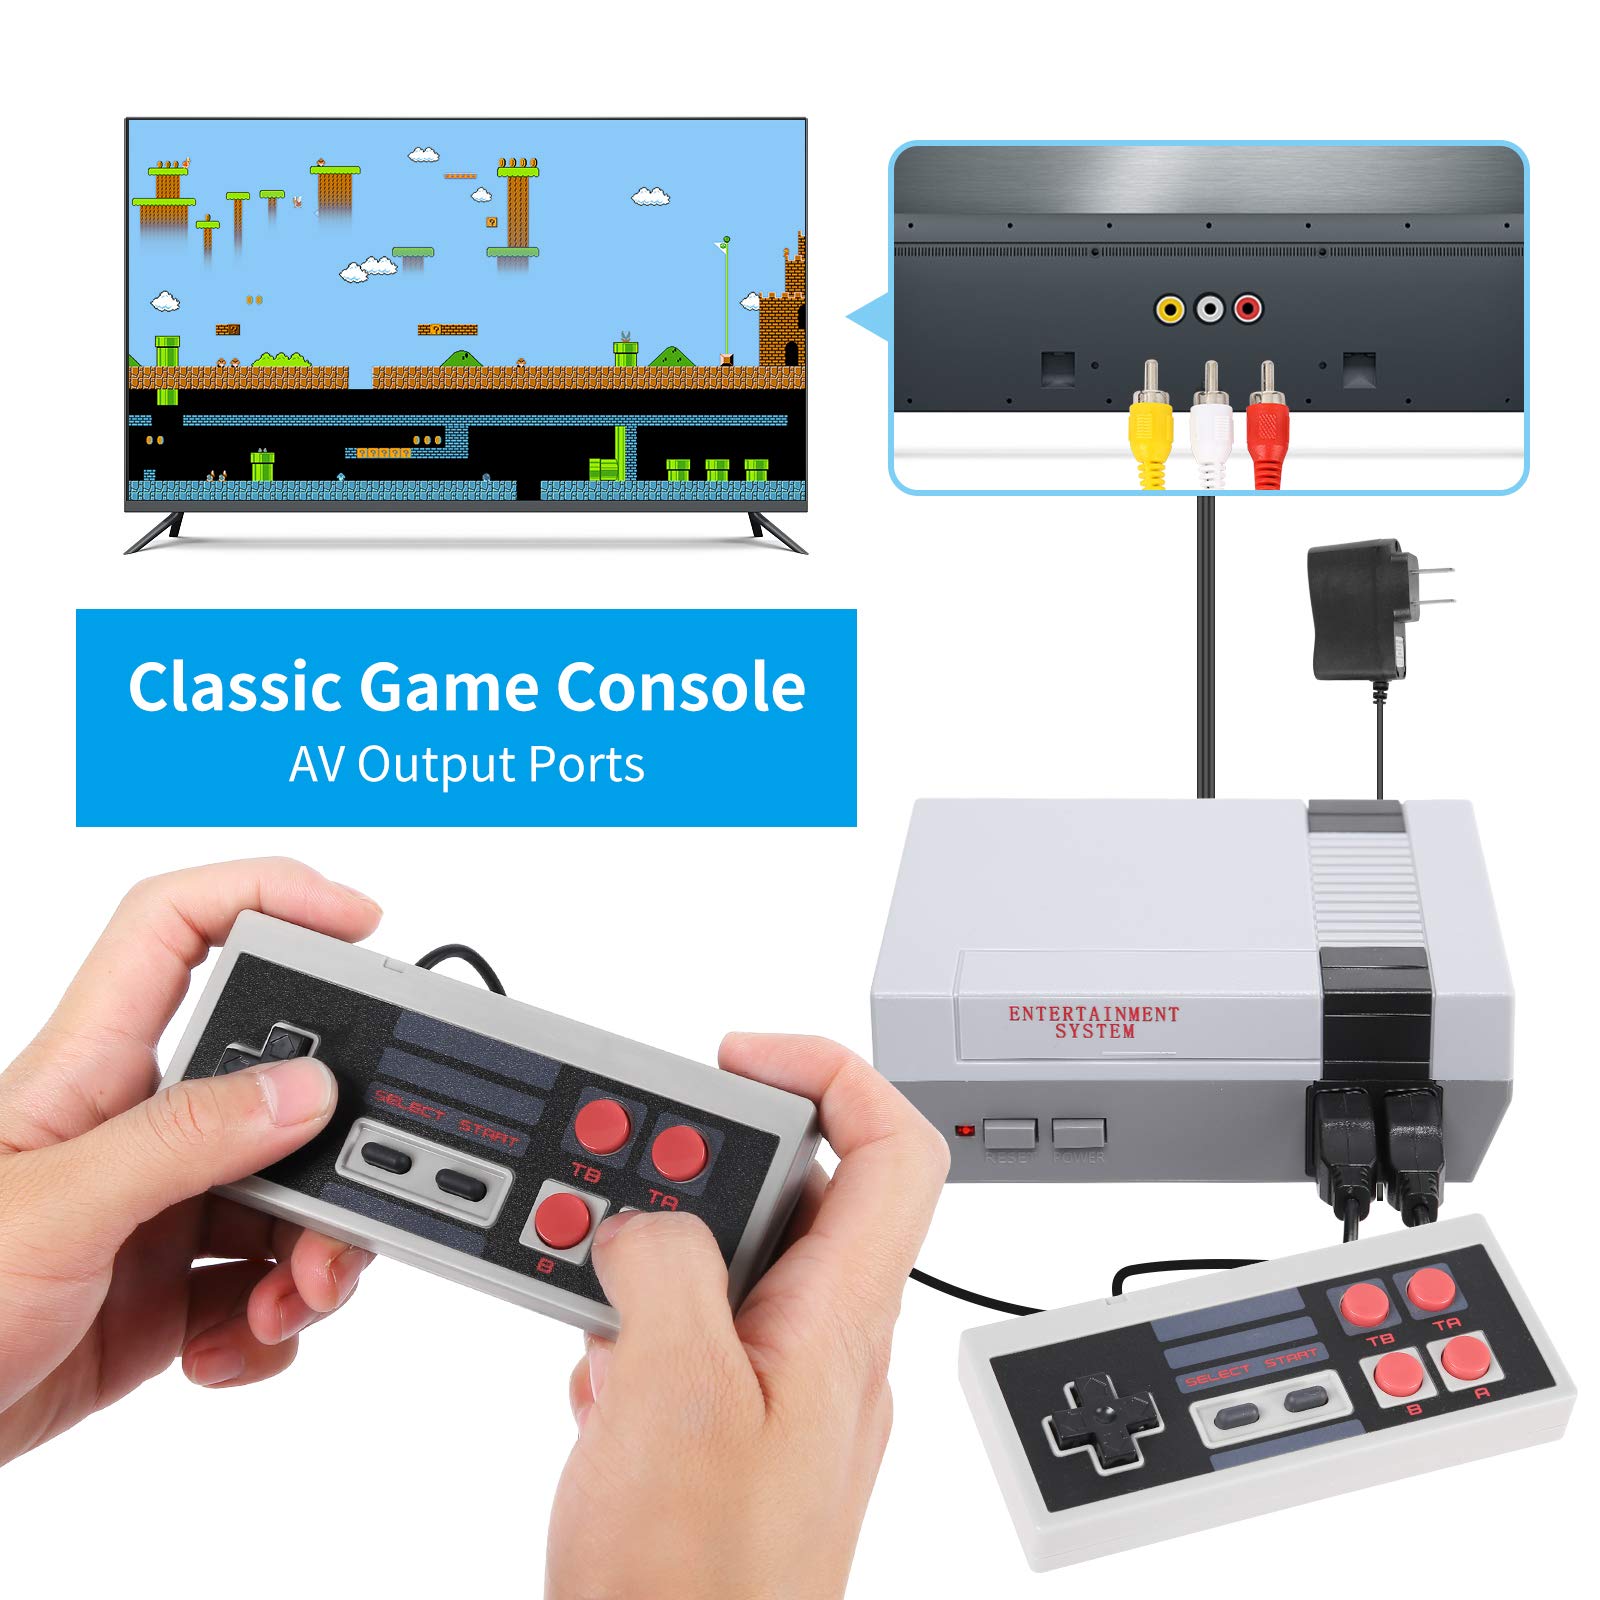 Classic Handheld Game Console, Classic Game Console Built-in 620 Game Handheld Game Console, Video Game Player Console-HMJ-Blue